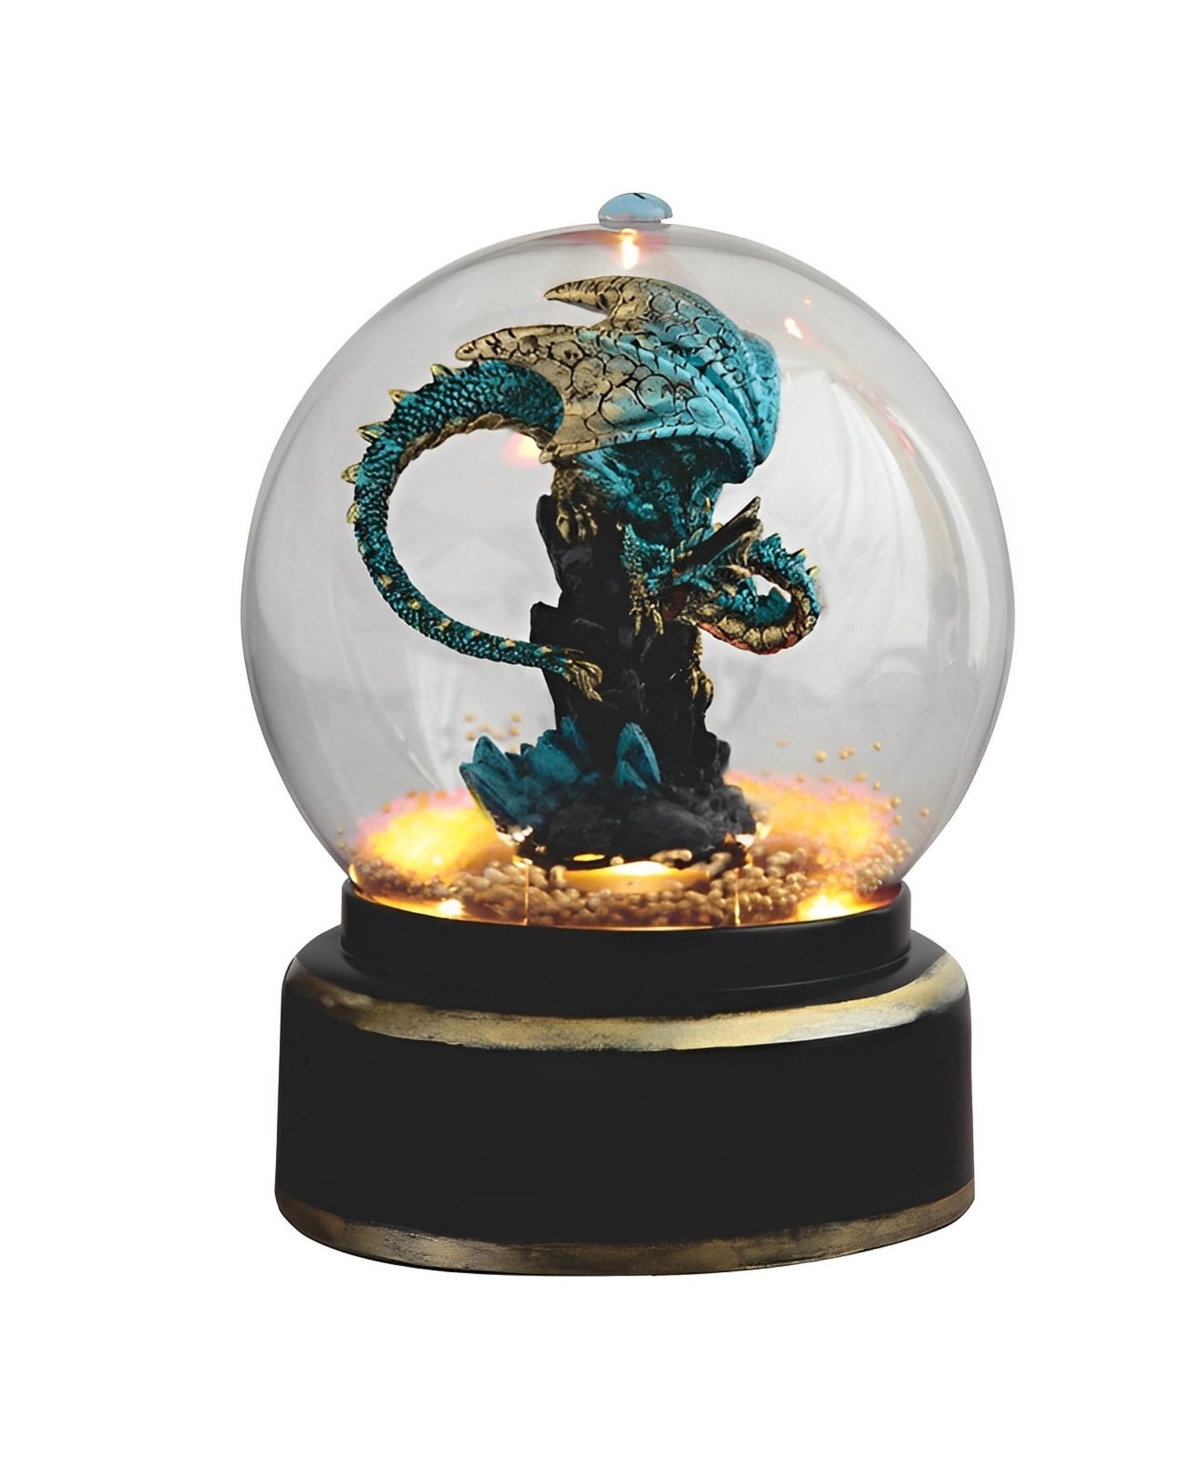 7.5"H Aqua Blue Dragon in Air Powered Snow Globe Home Decor Perfect Gift for House Warming, Holidays and Birthdays - Multicolor